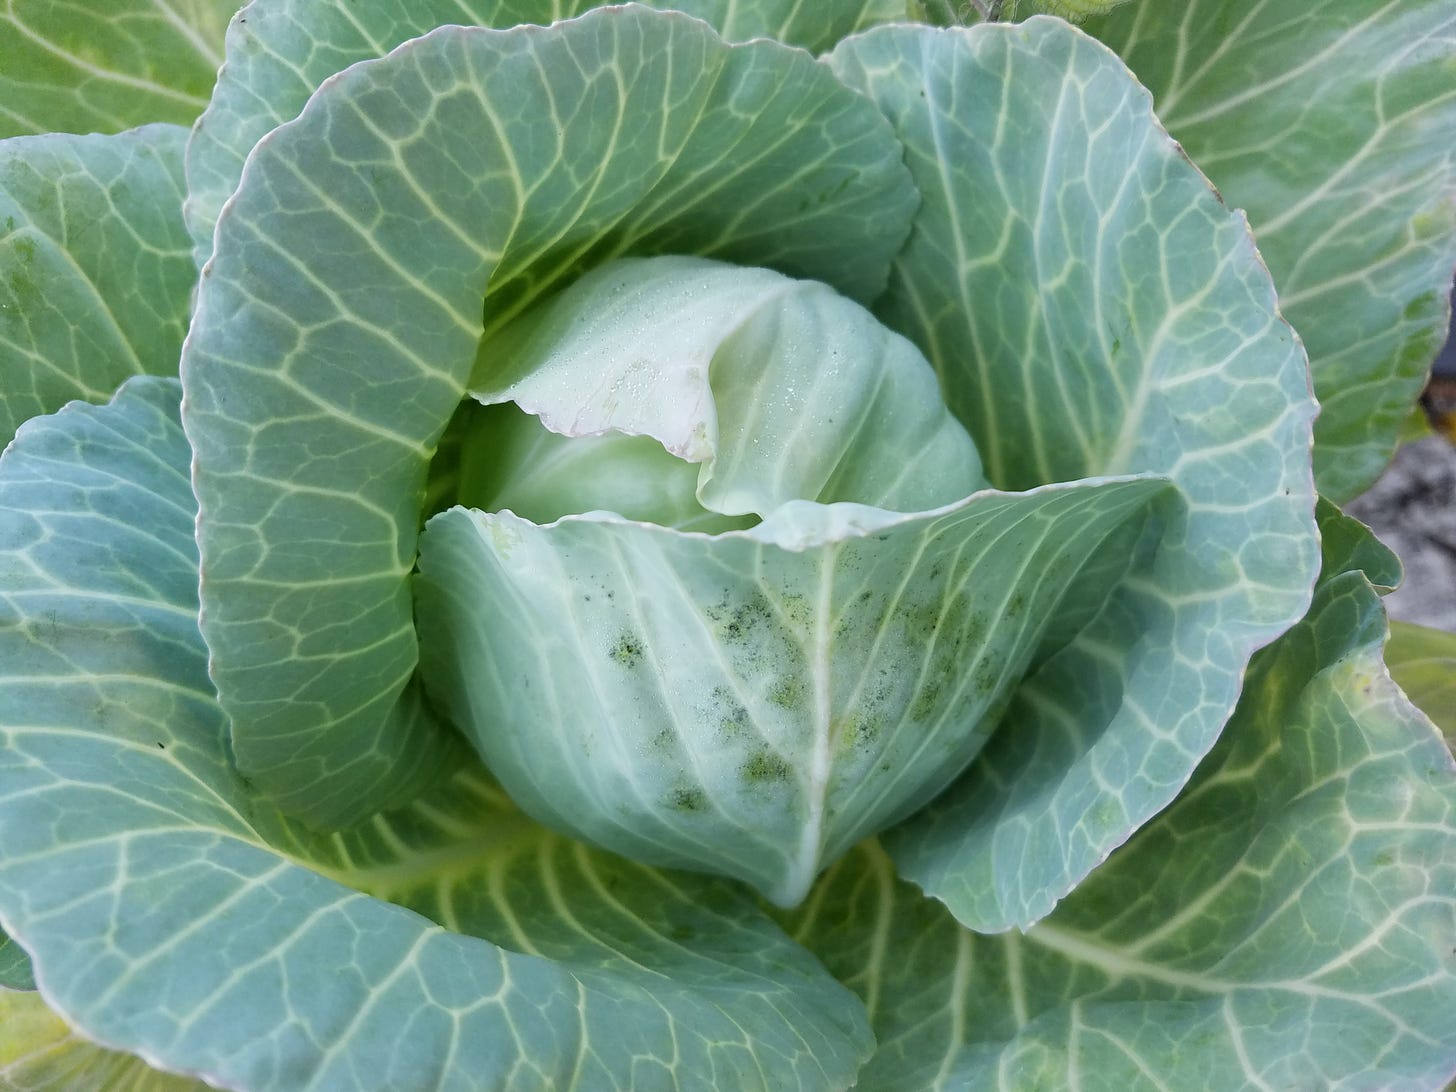 A head of green cabbage ready for harvest